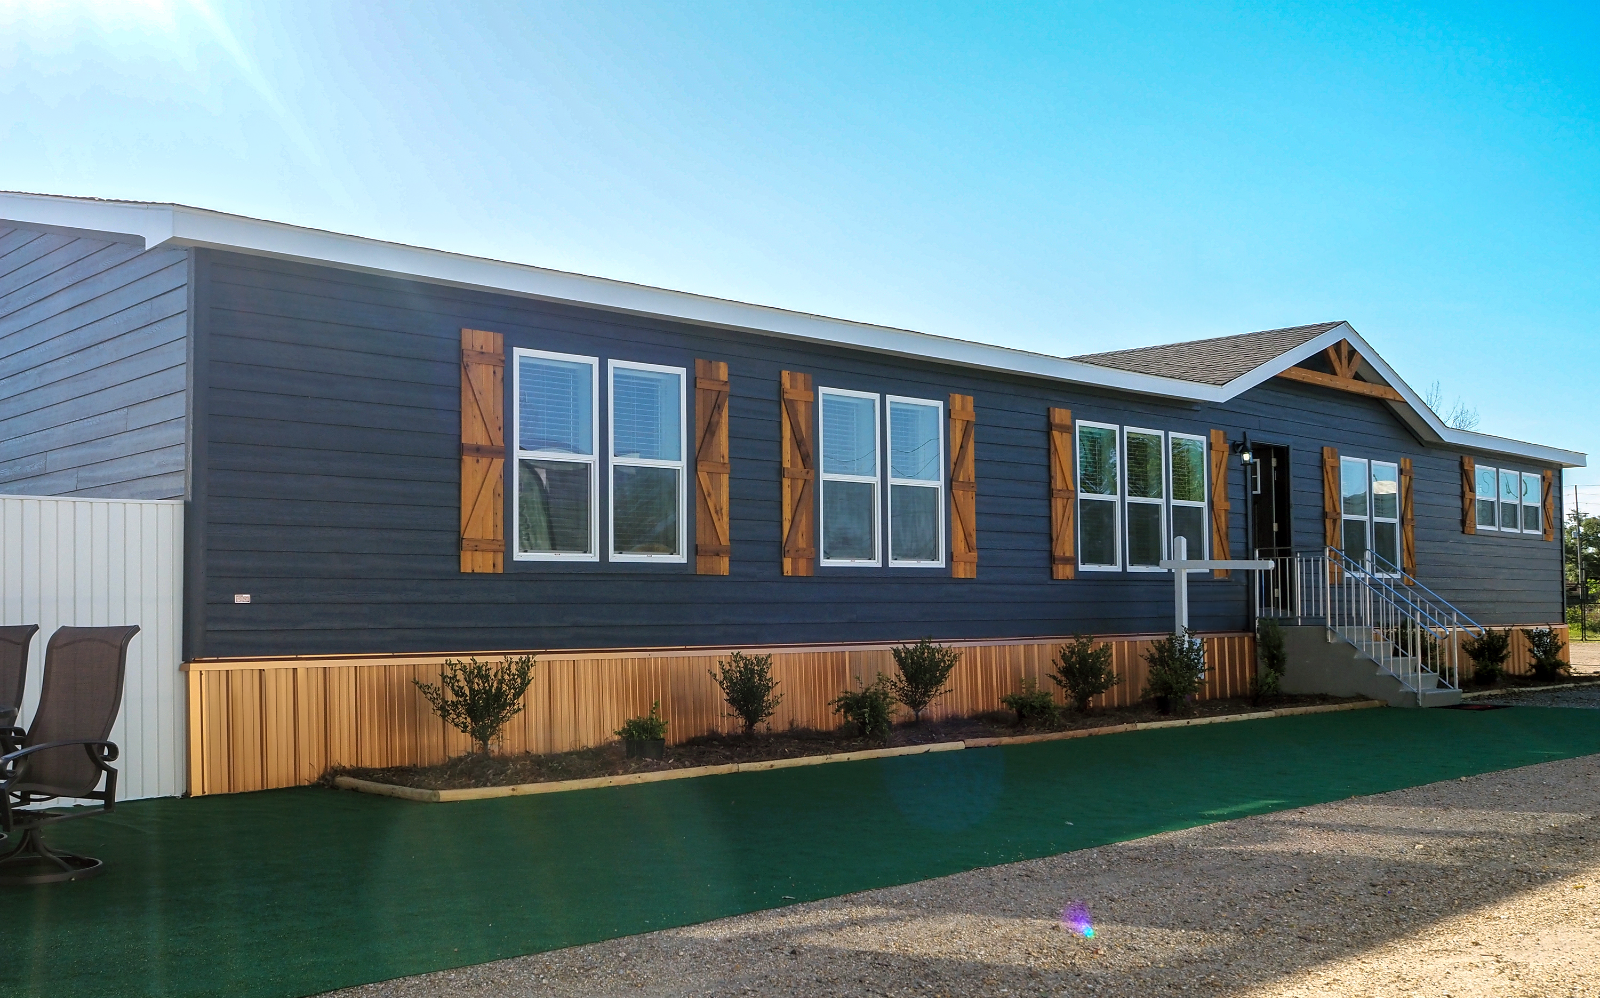 Creating a Solid Foundation: Best Practices for Anchoring a Manufactured Home